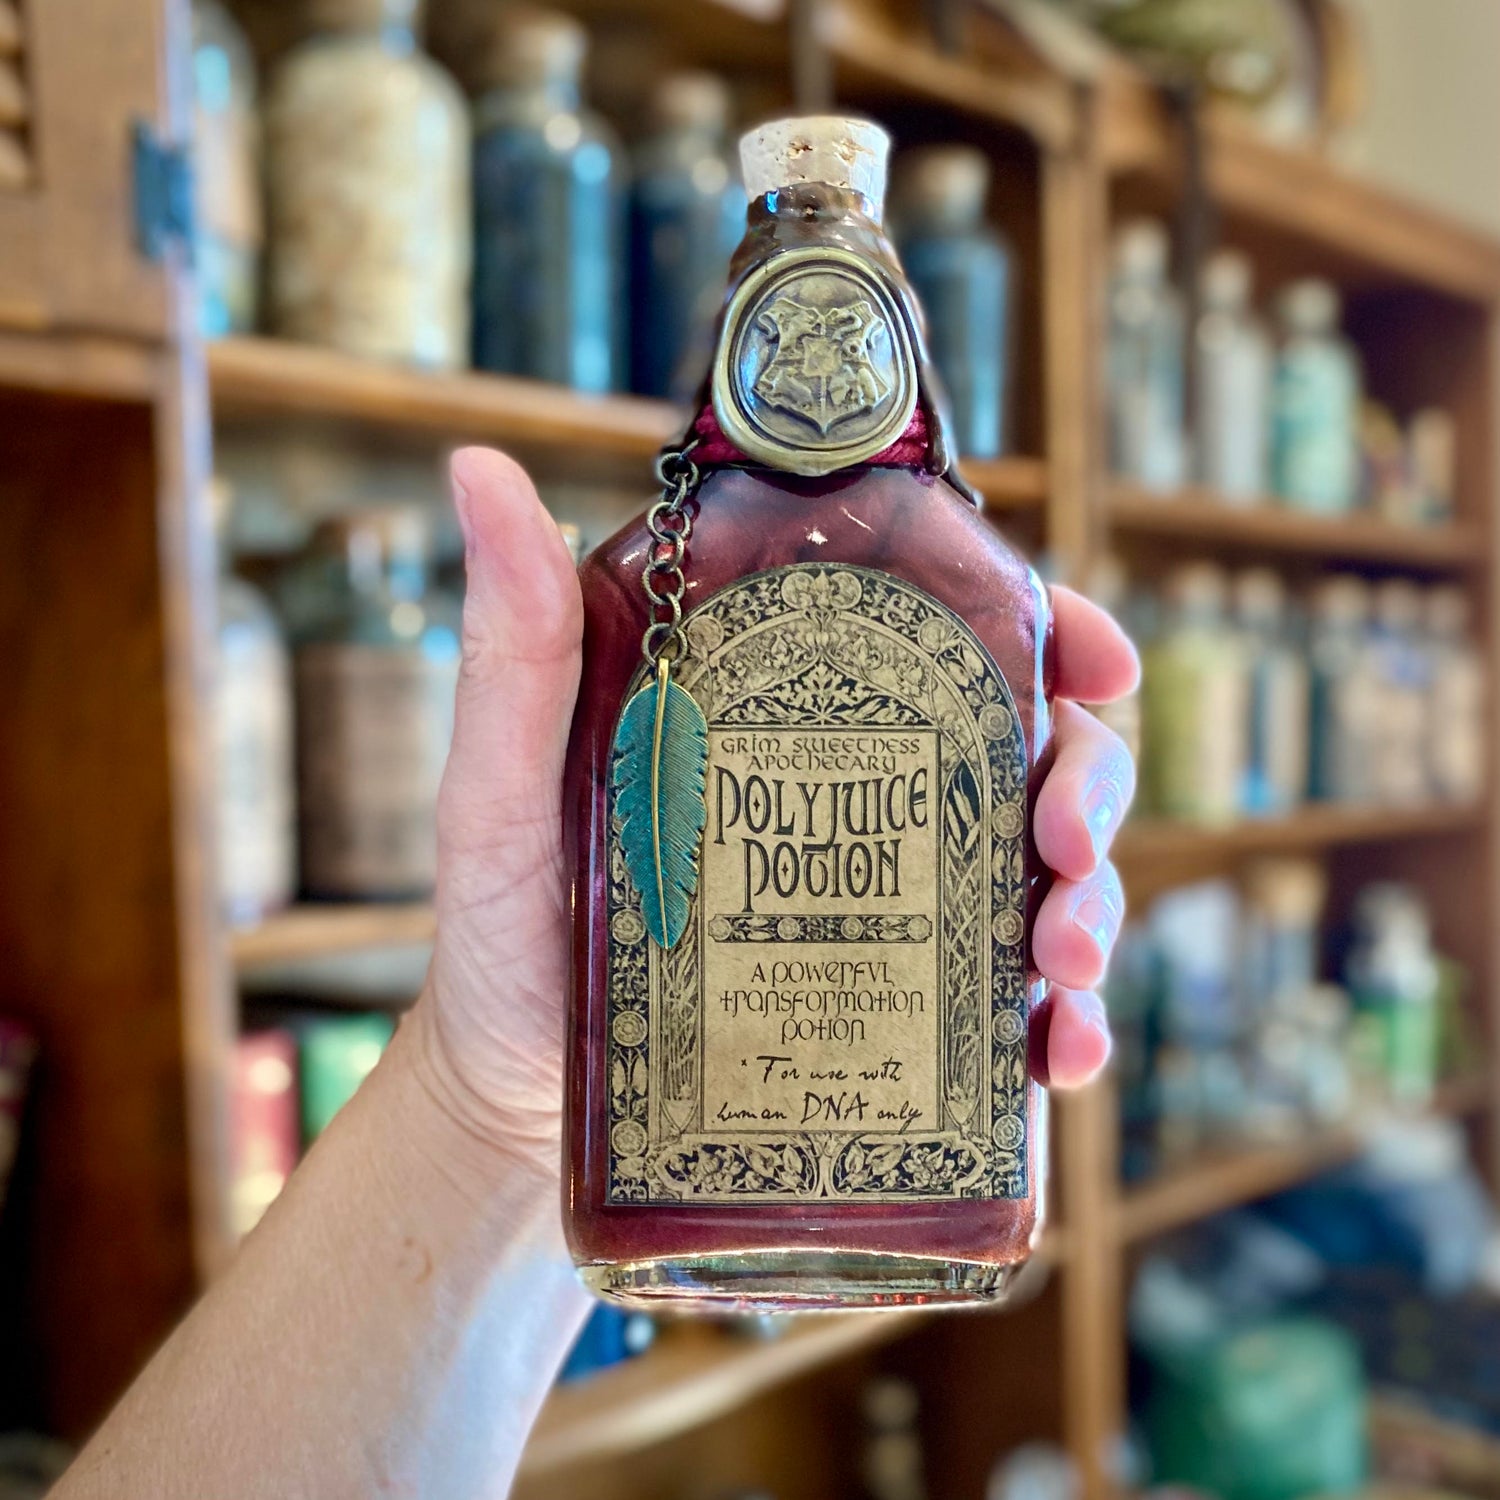 Health Potion, A Color Changing Potion Bottle Prop – Grim Sweetness  Apothecary